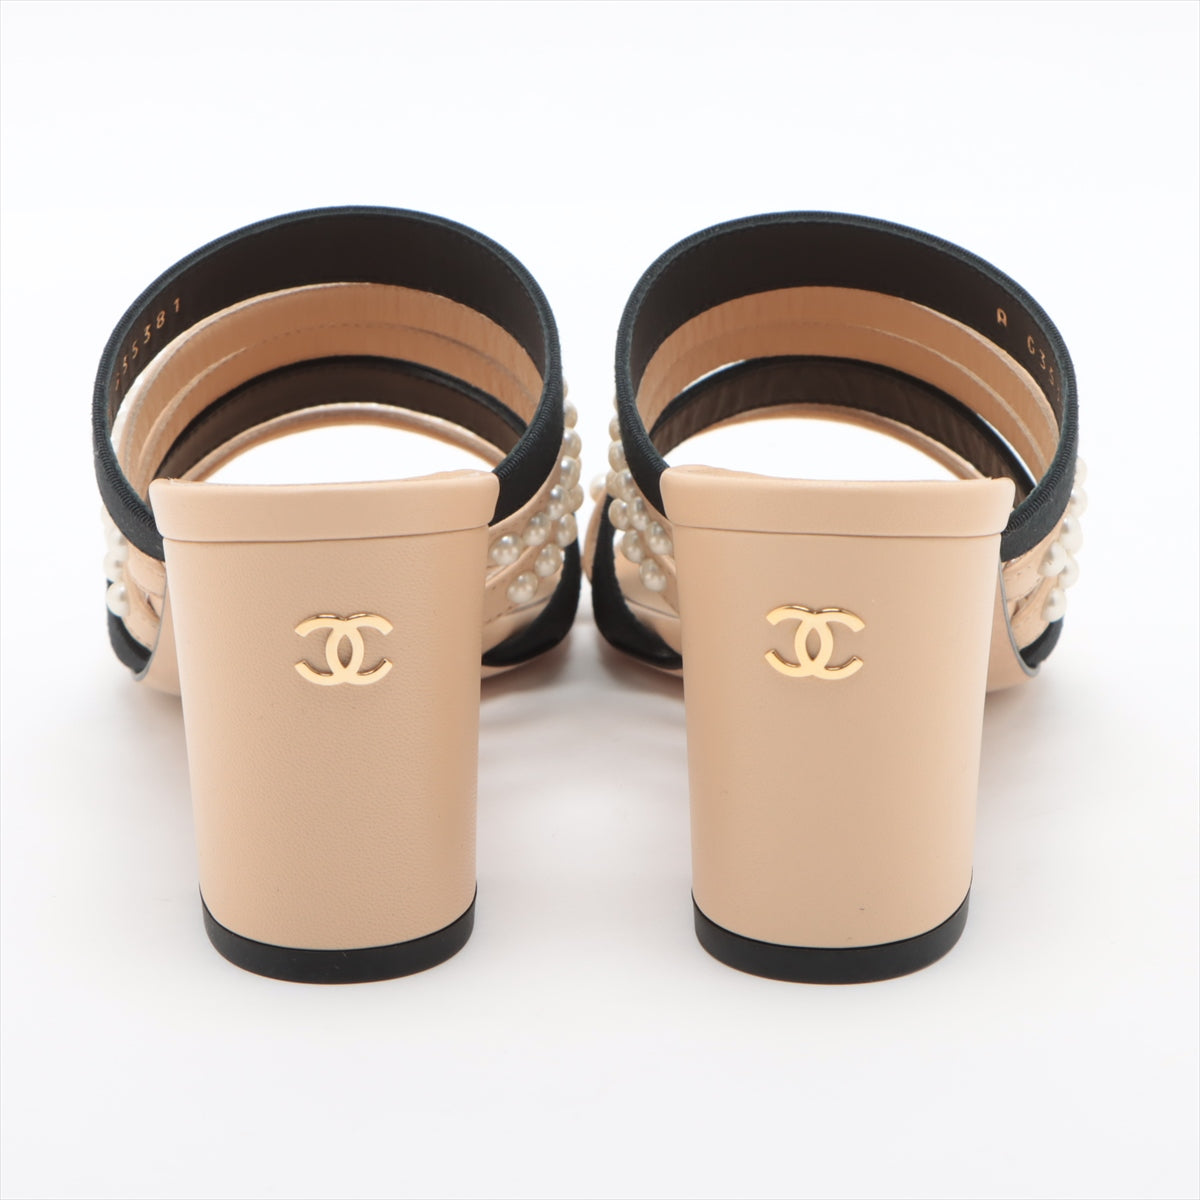 Chanel Coco Mark Leather x fabric Sandals 35C Ladies' Beige x black G35381 Pearl ミュールサンダル There is a storage bag